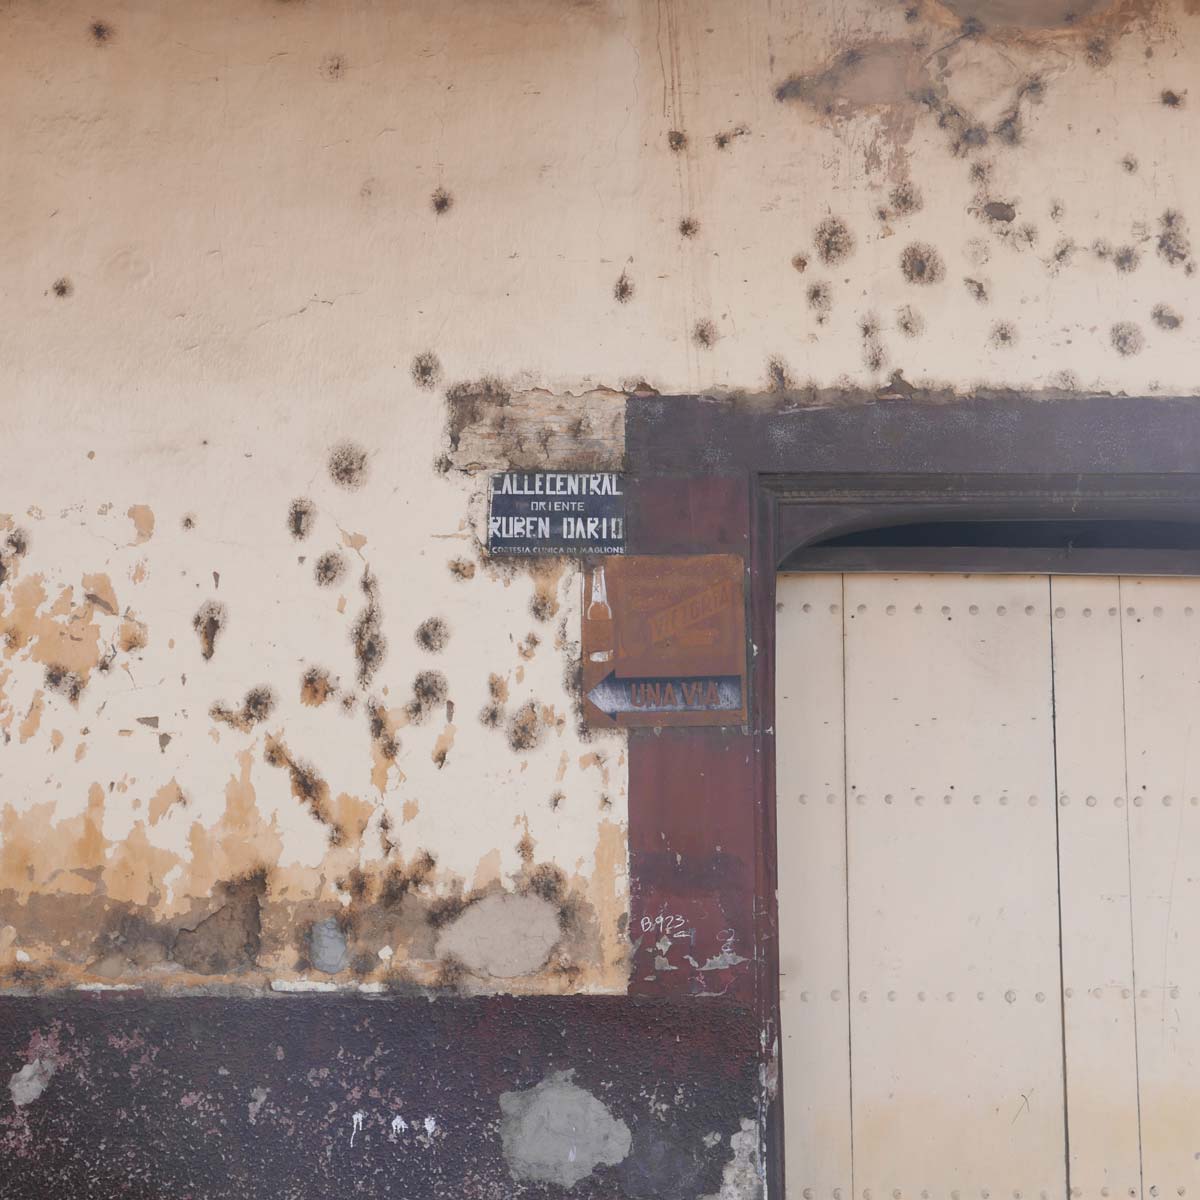 Recent bullet holes in a wall in Leon, Nicaragua